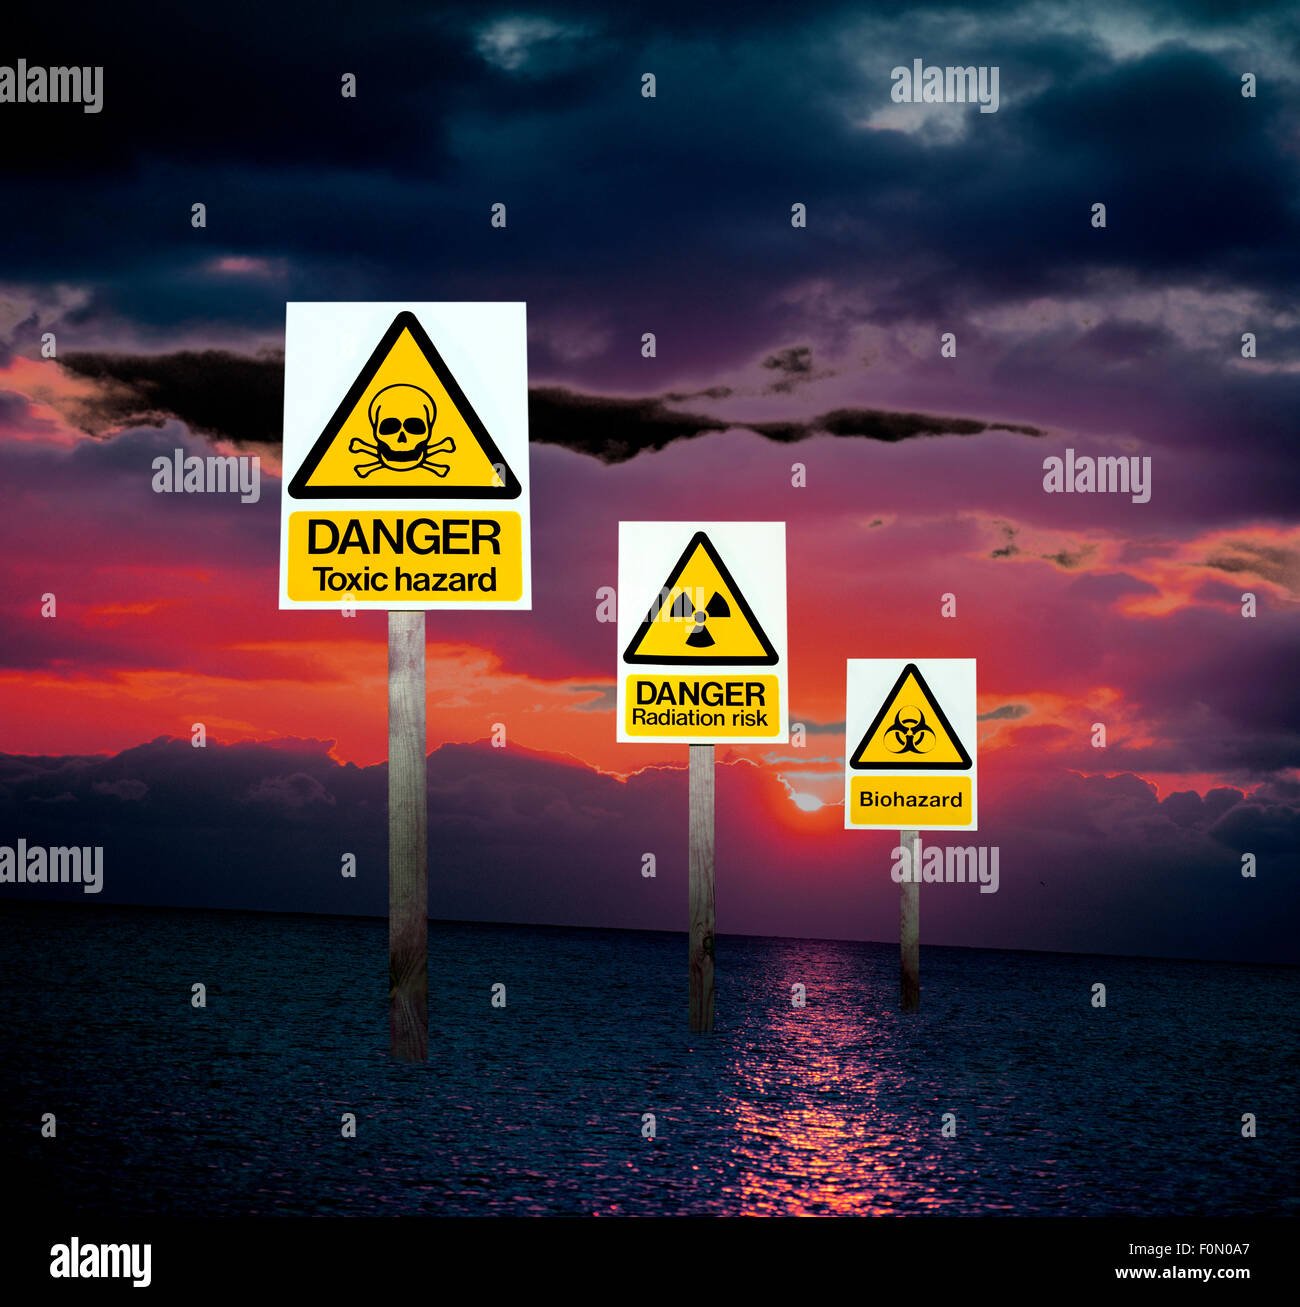 Three warning signs of health hazards and environmental dangers in a digital image illustrating a world of polluted air and sea. Stock Photo